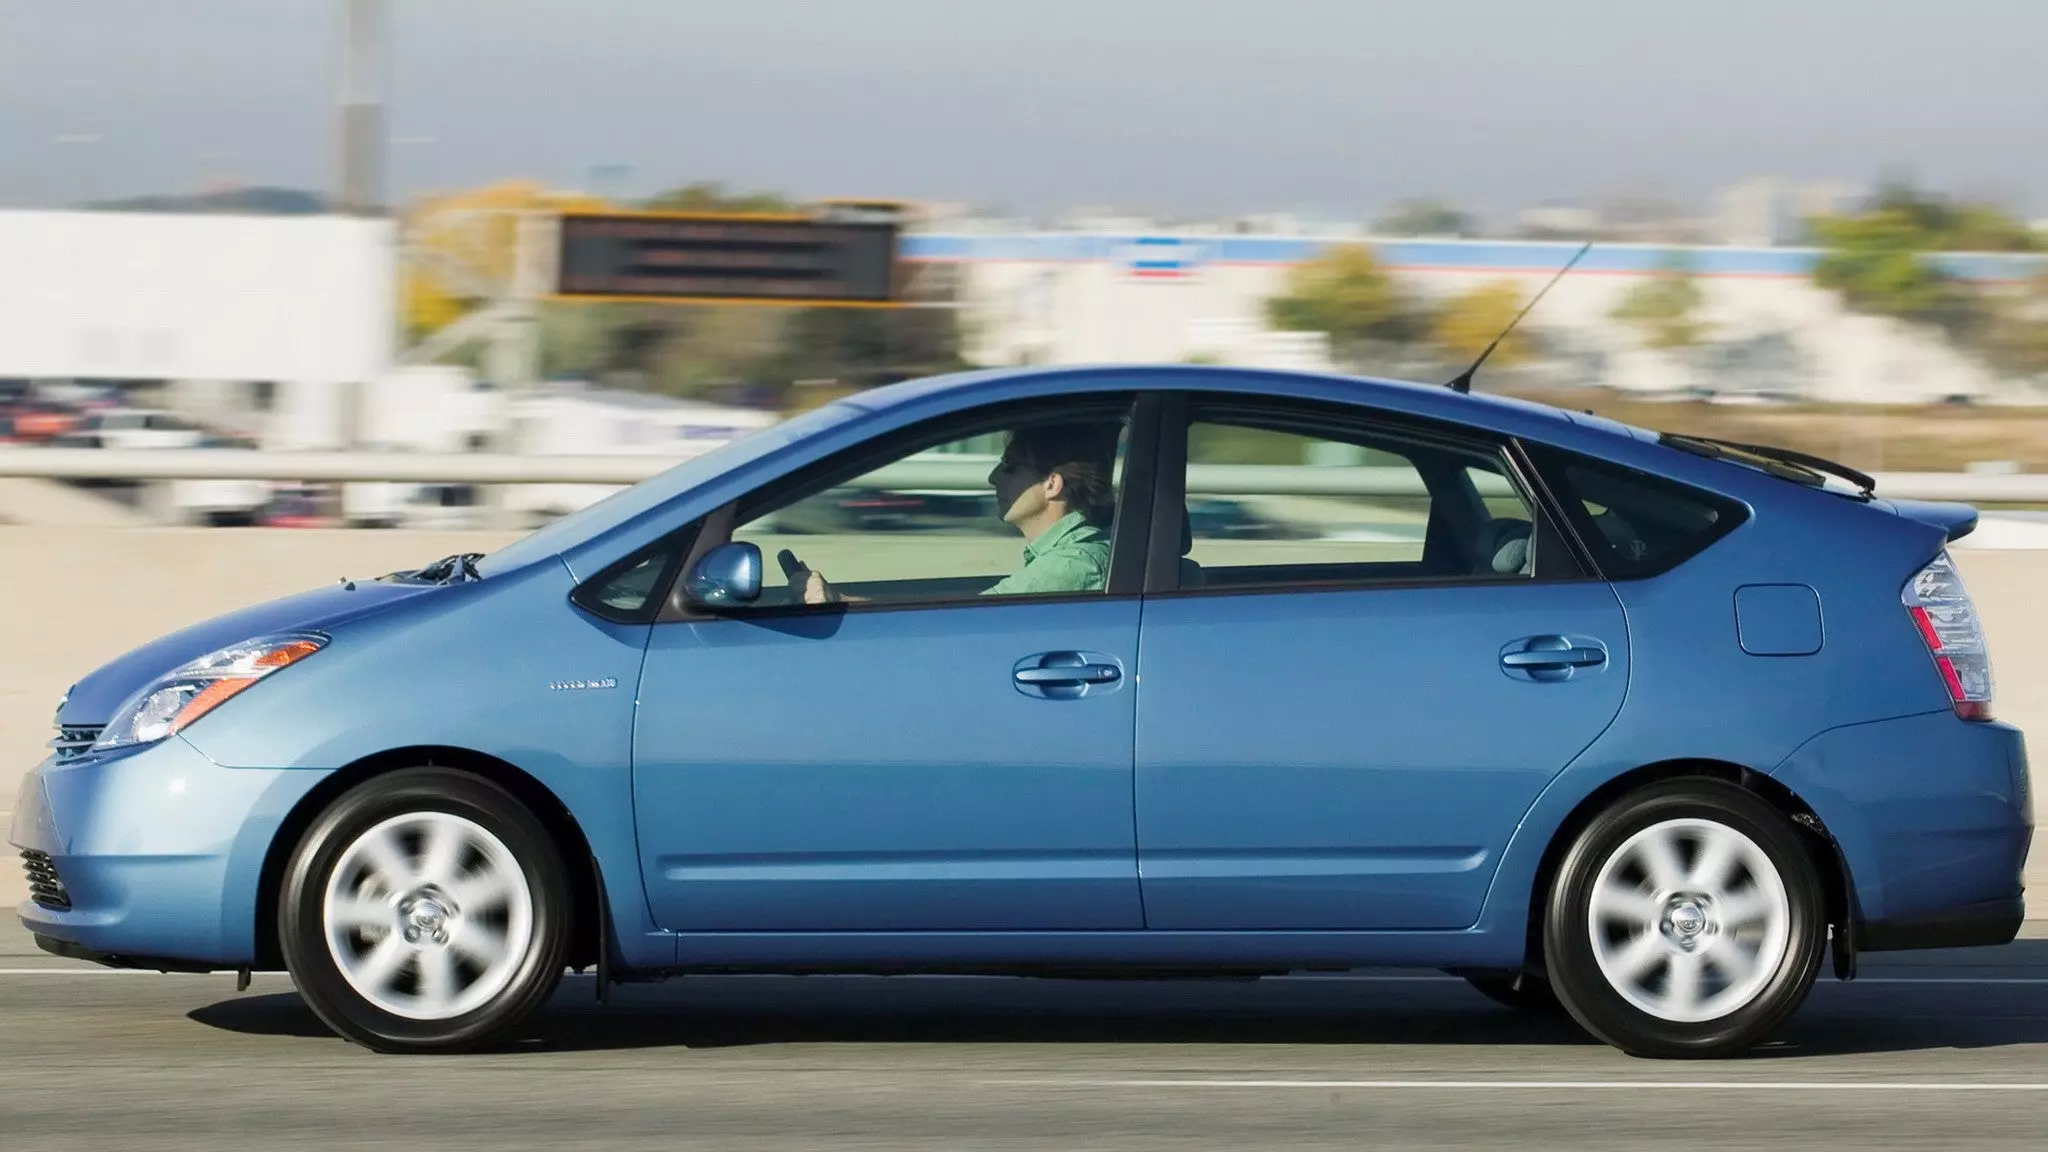 Toyota Prius Drivers Should Be Extra Wary of Catalytic Converter Theft